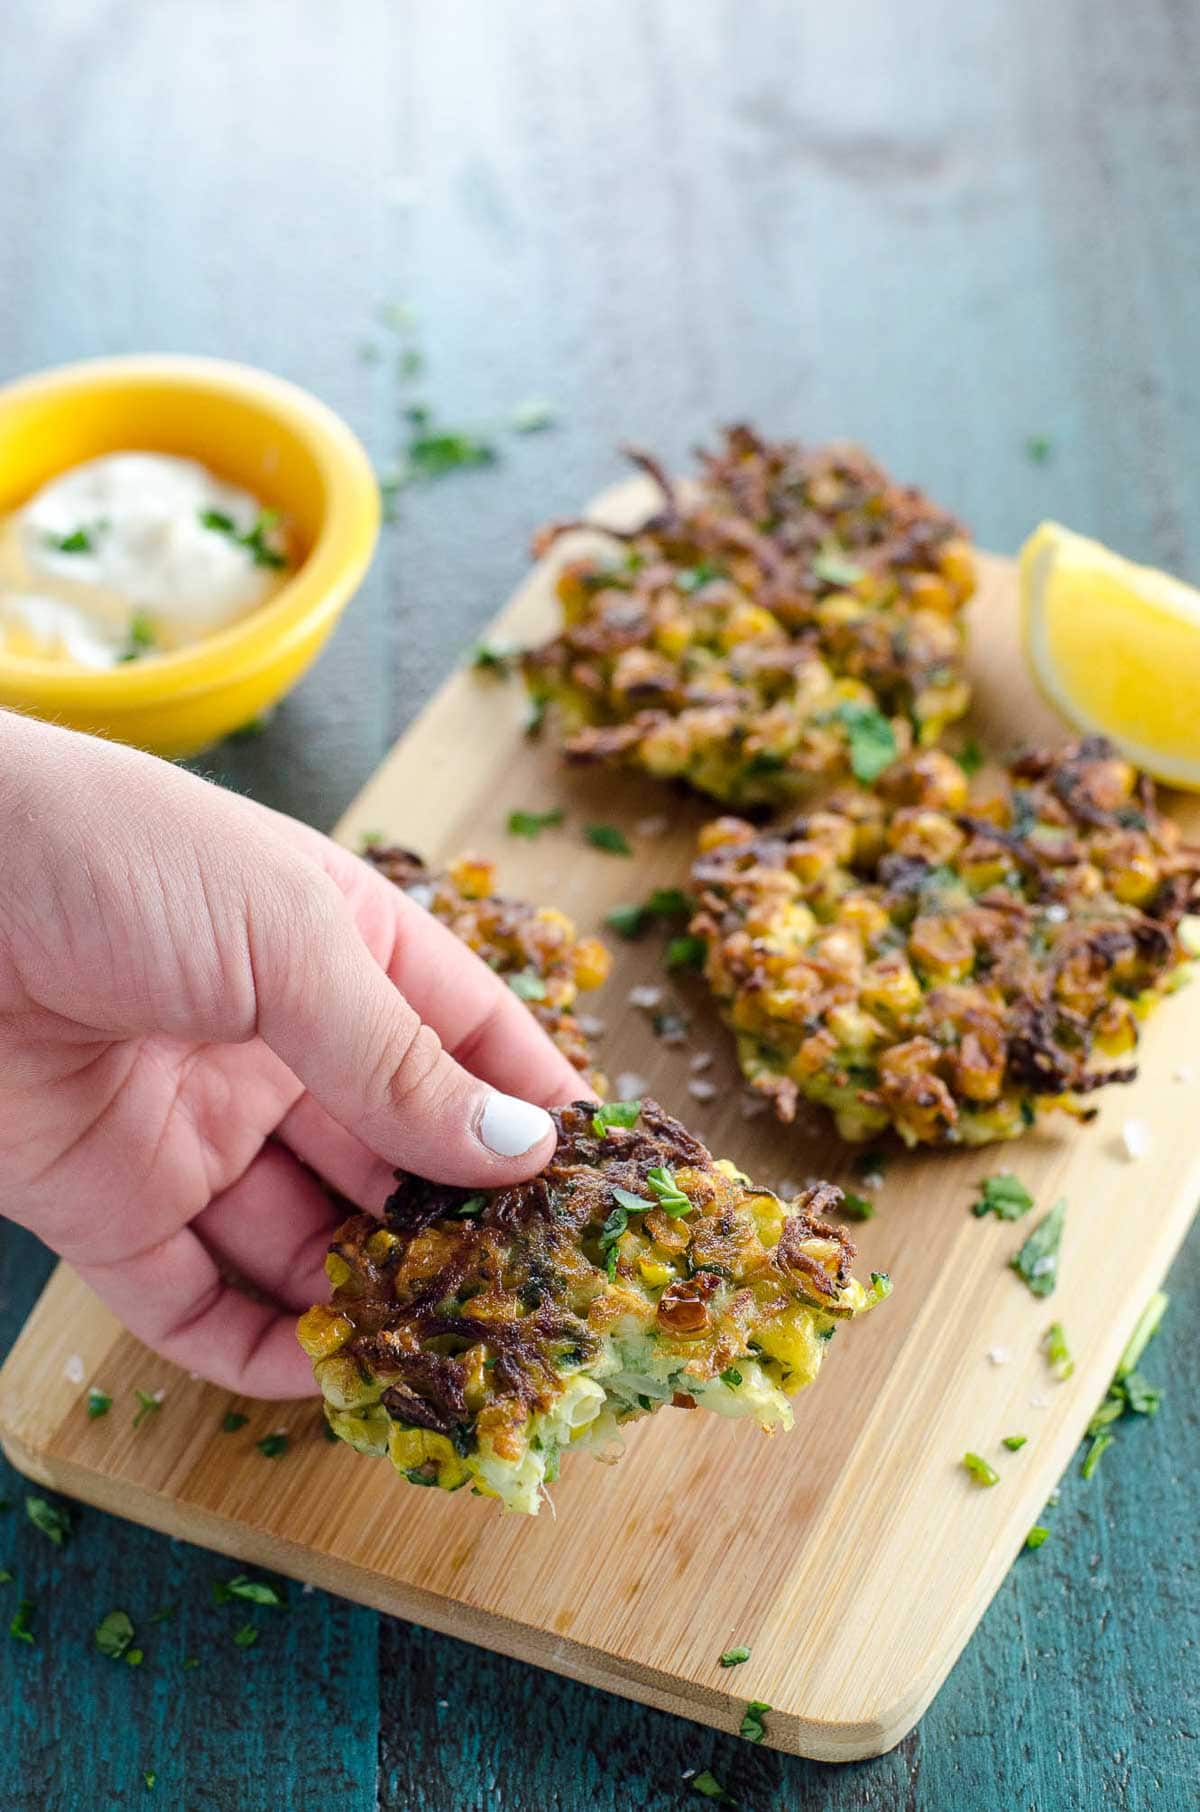 a child's hand picking up a zucchini and corn fritter